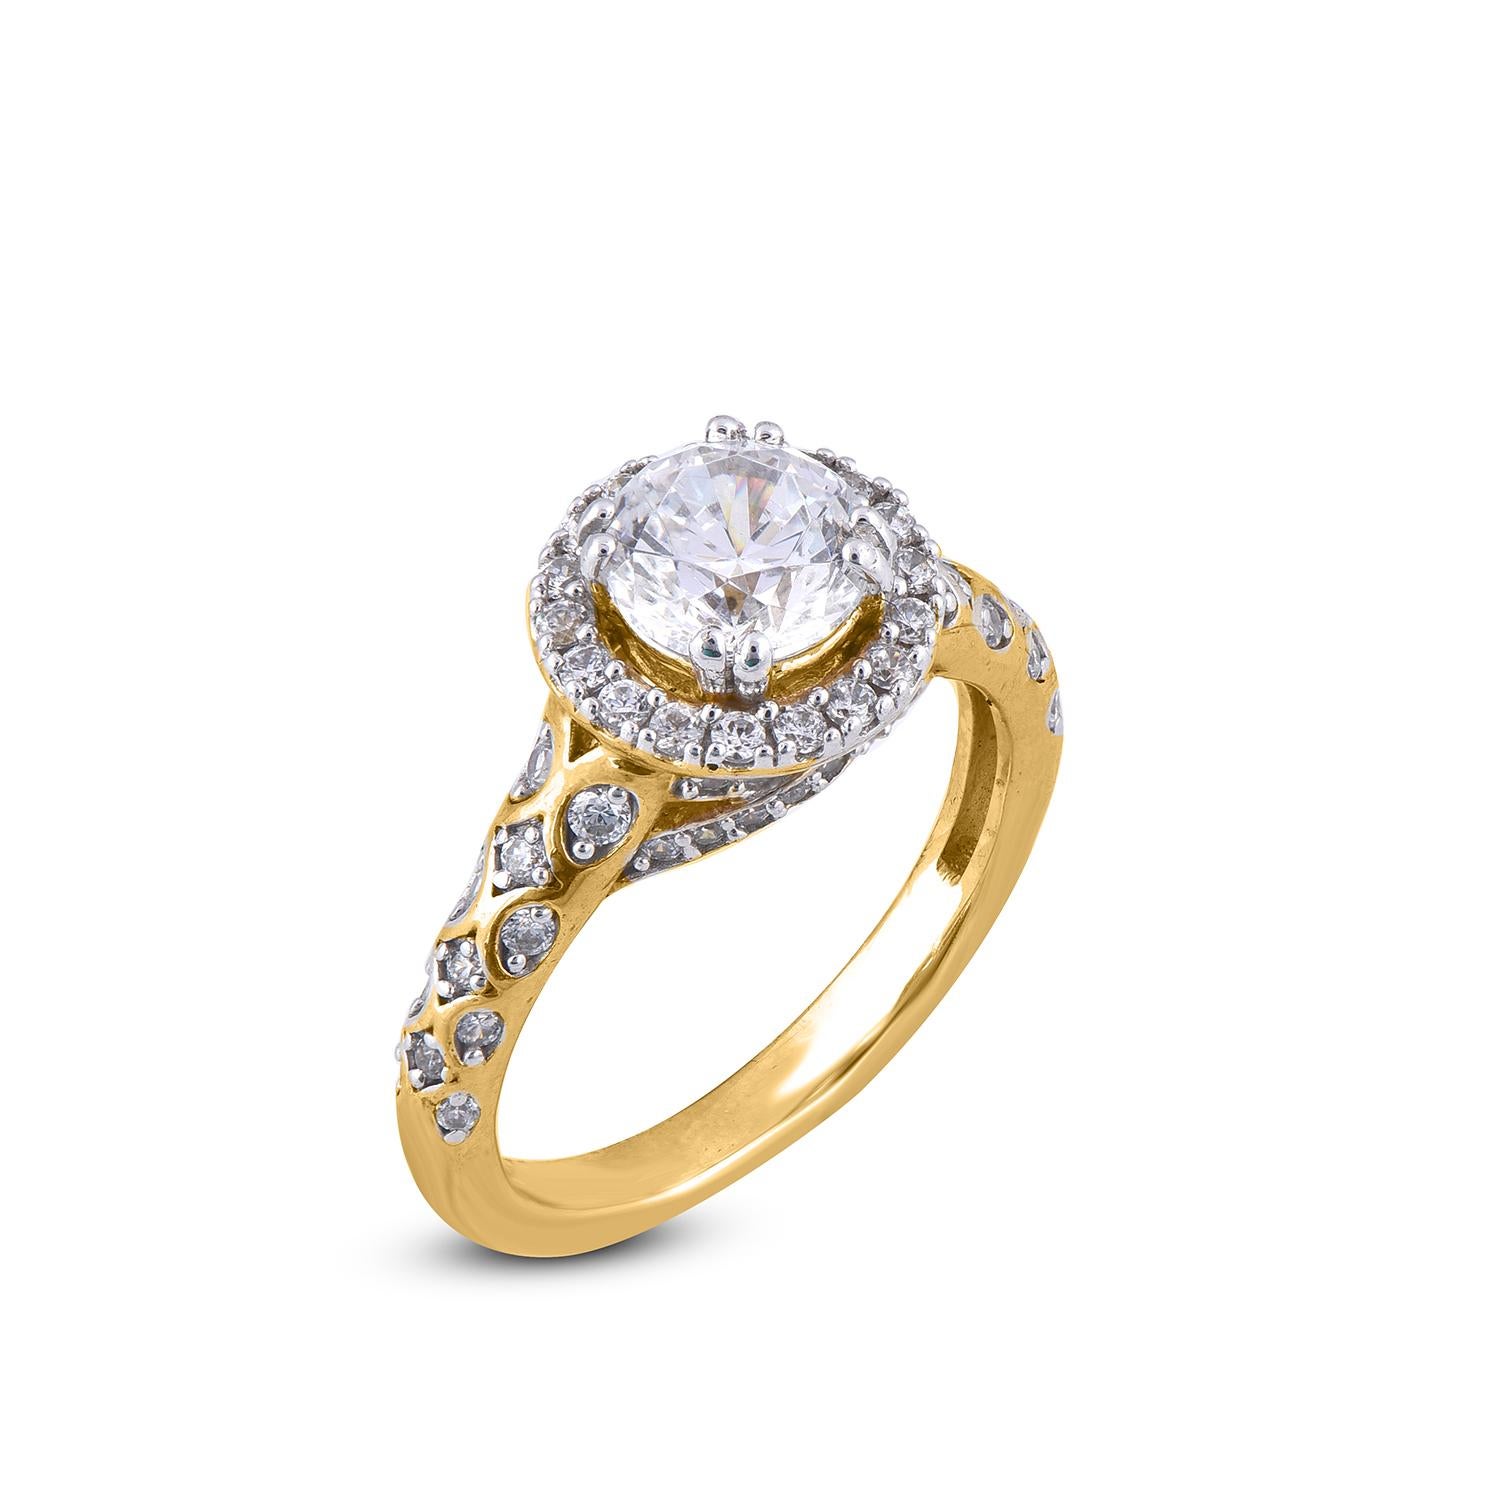 This Round Halo Diamond Engagement ring is expertly crafted in 18 Karat Yellow Gold and features 1.00 ct centre stone and 0.50 ct of diamond frame and shank lined with 66 round diamonds set in prong setting. The diamond are natural, not treated and